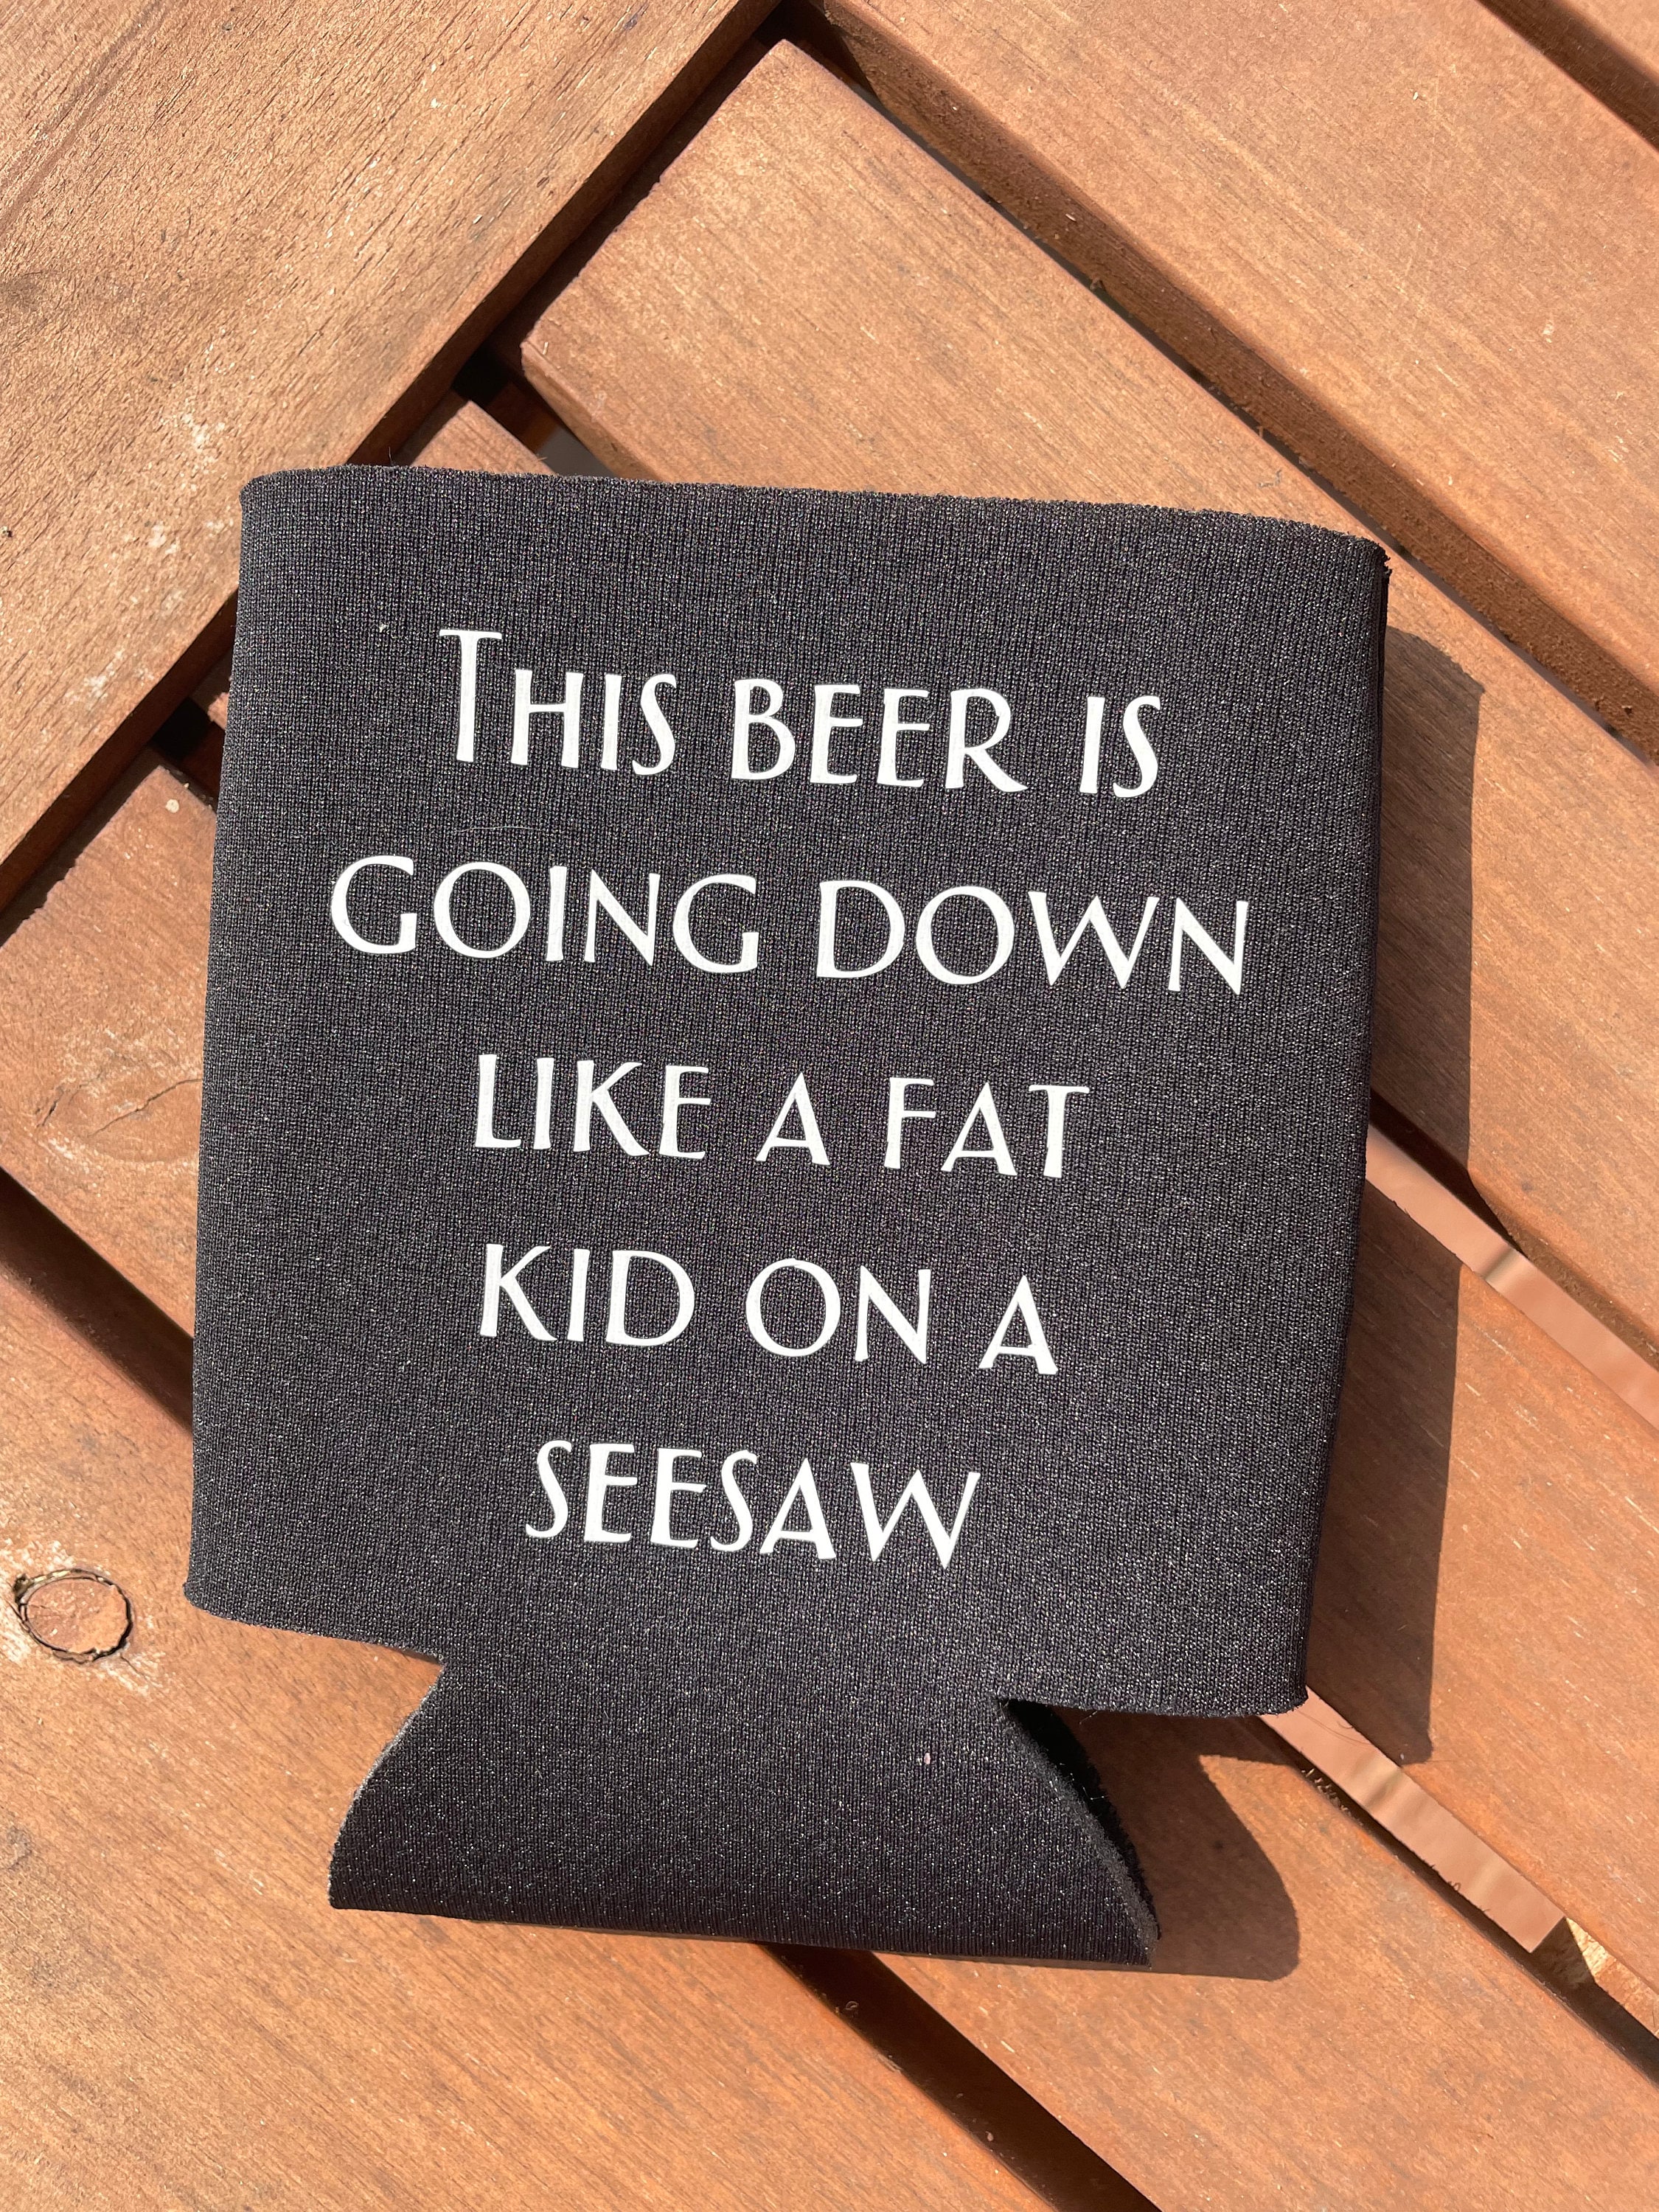 This beer is going down like a fat kid on a seesaw. Beer Koozie. – M E R I  W E T H E R